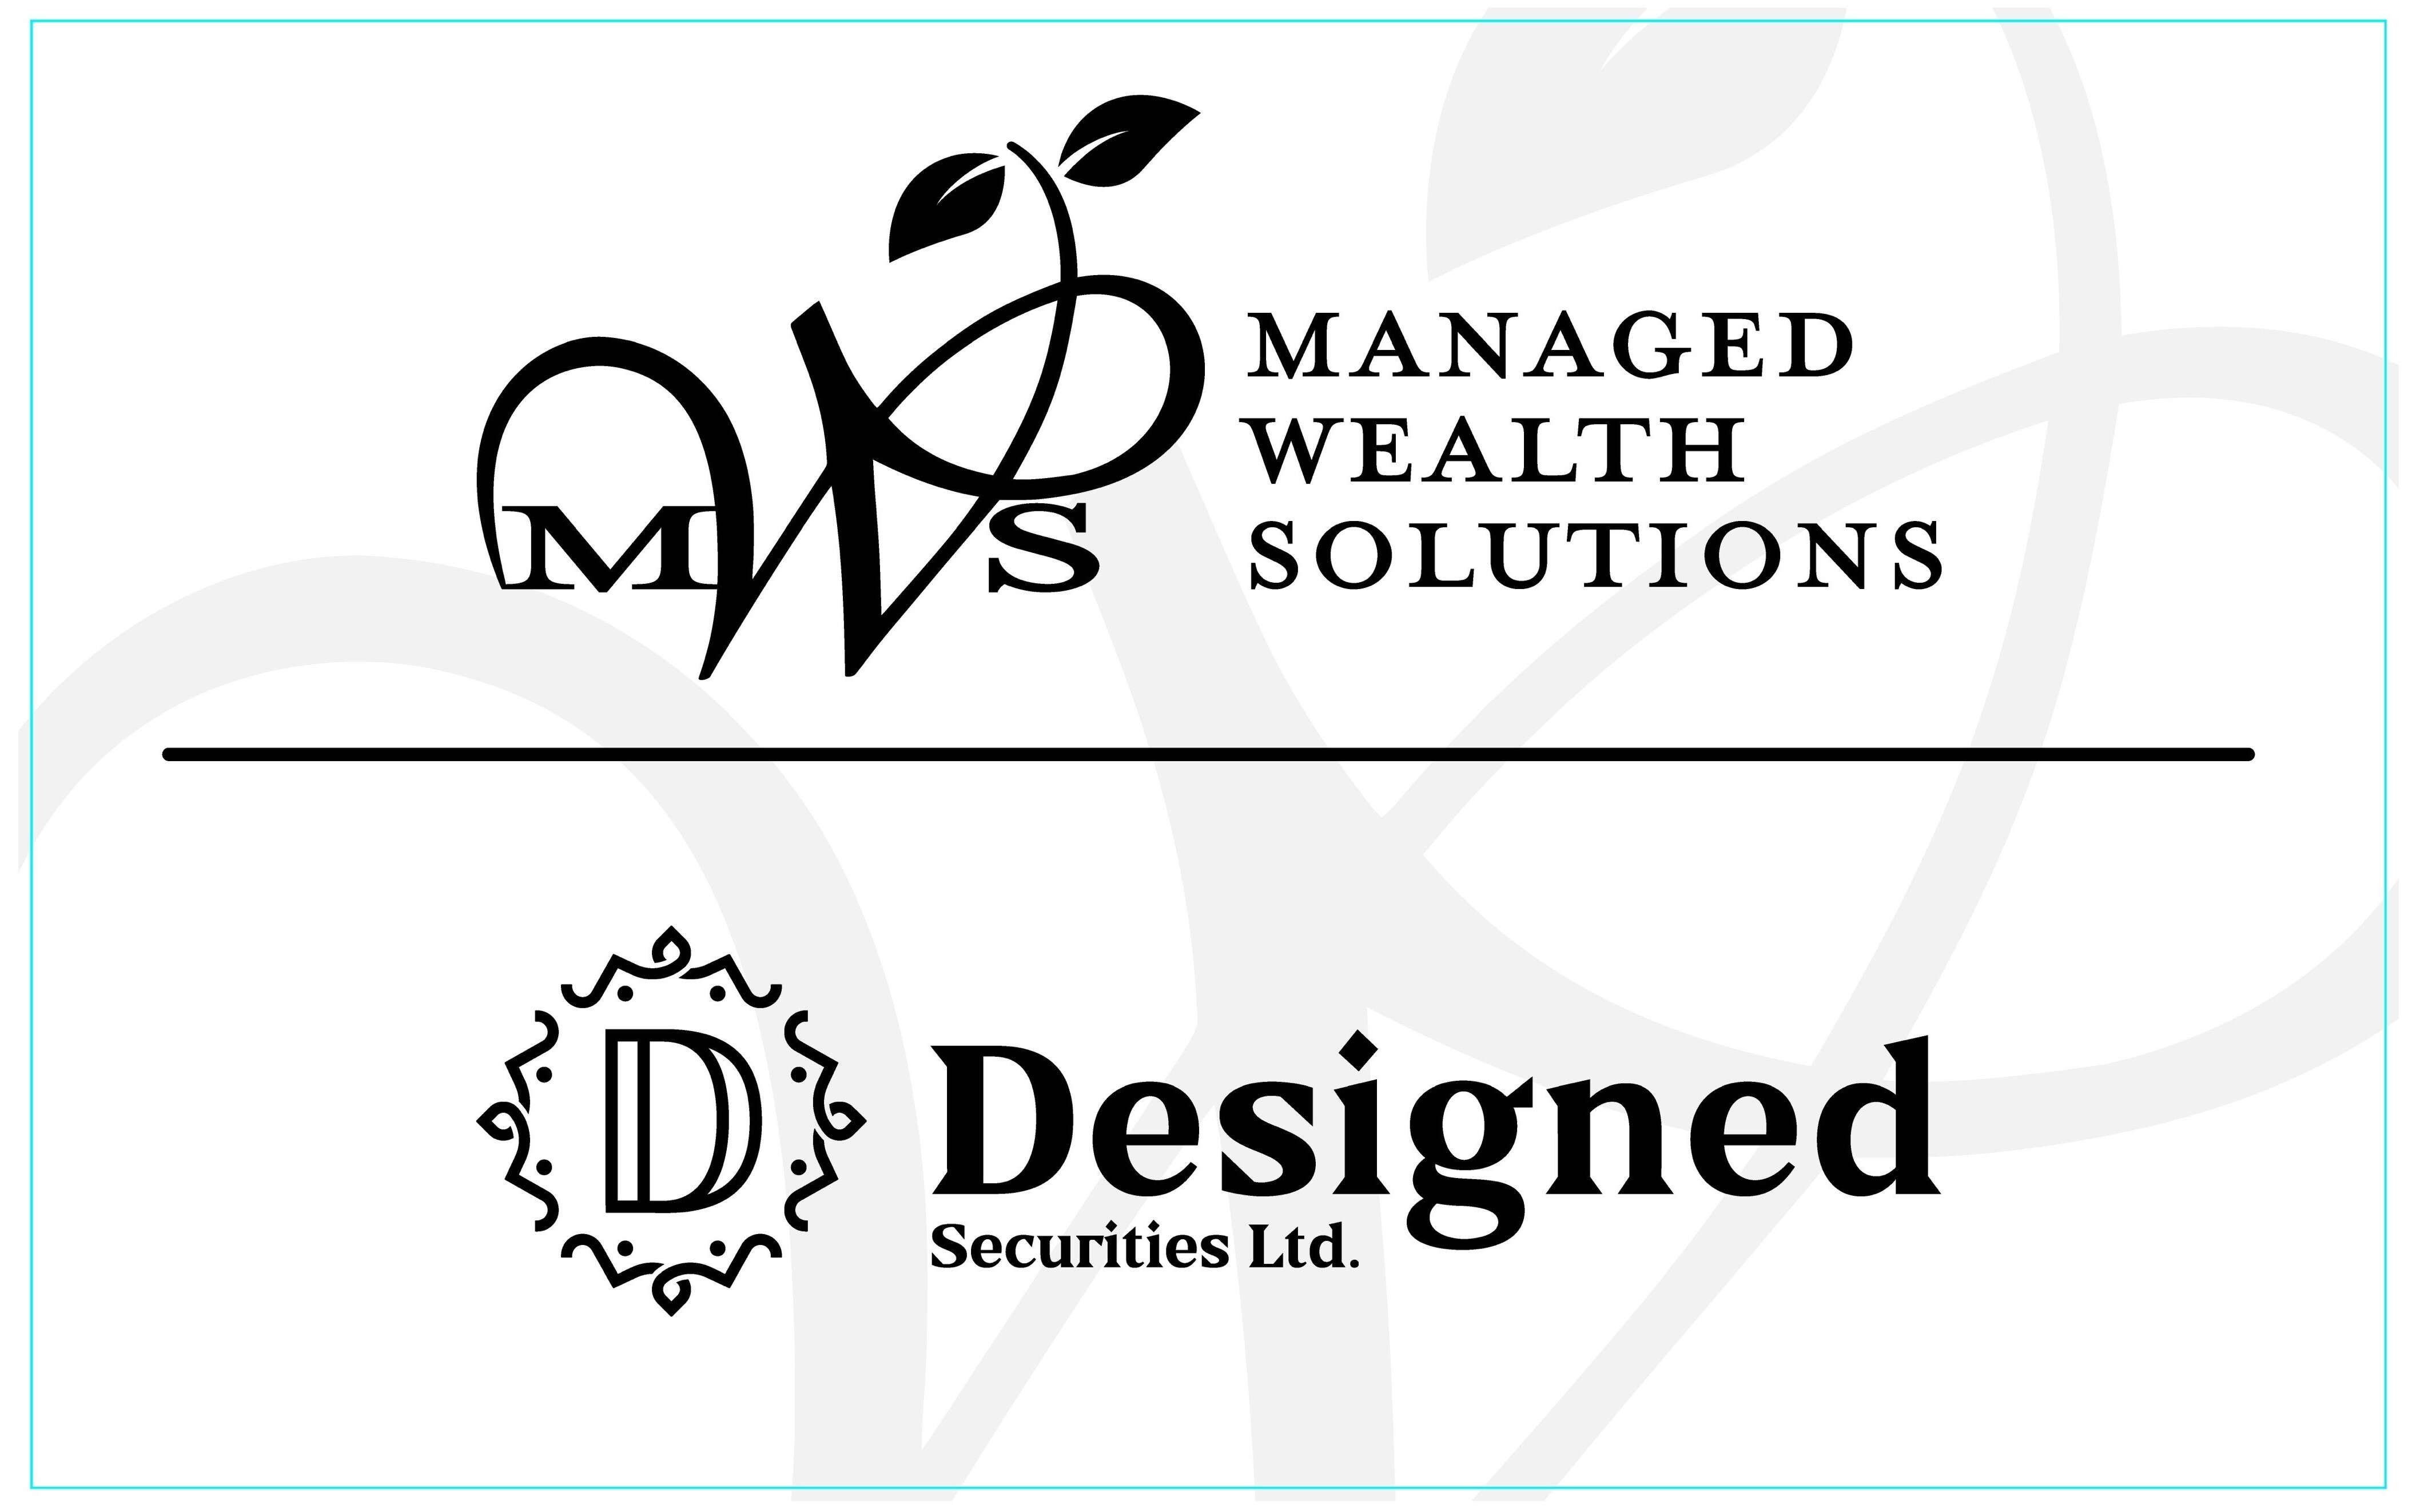 Managed Wealth Solutions -           Designed Securities Ltd.